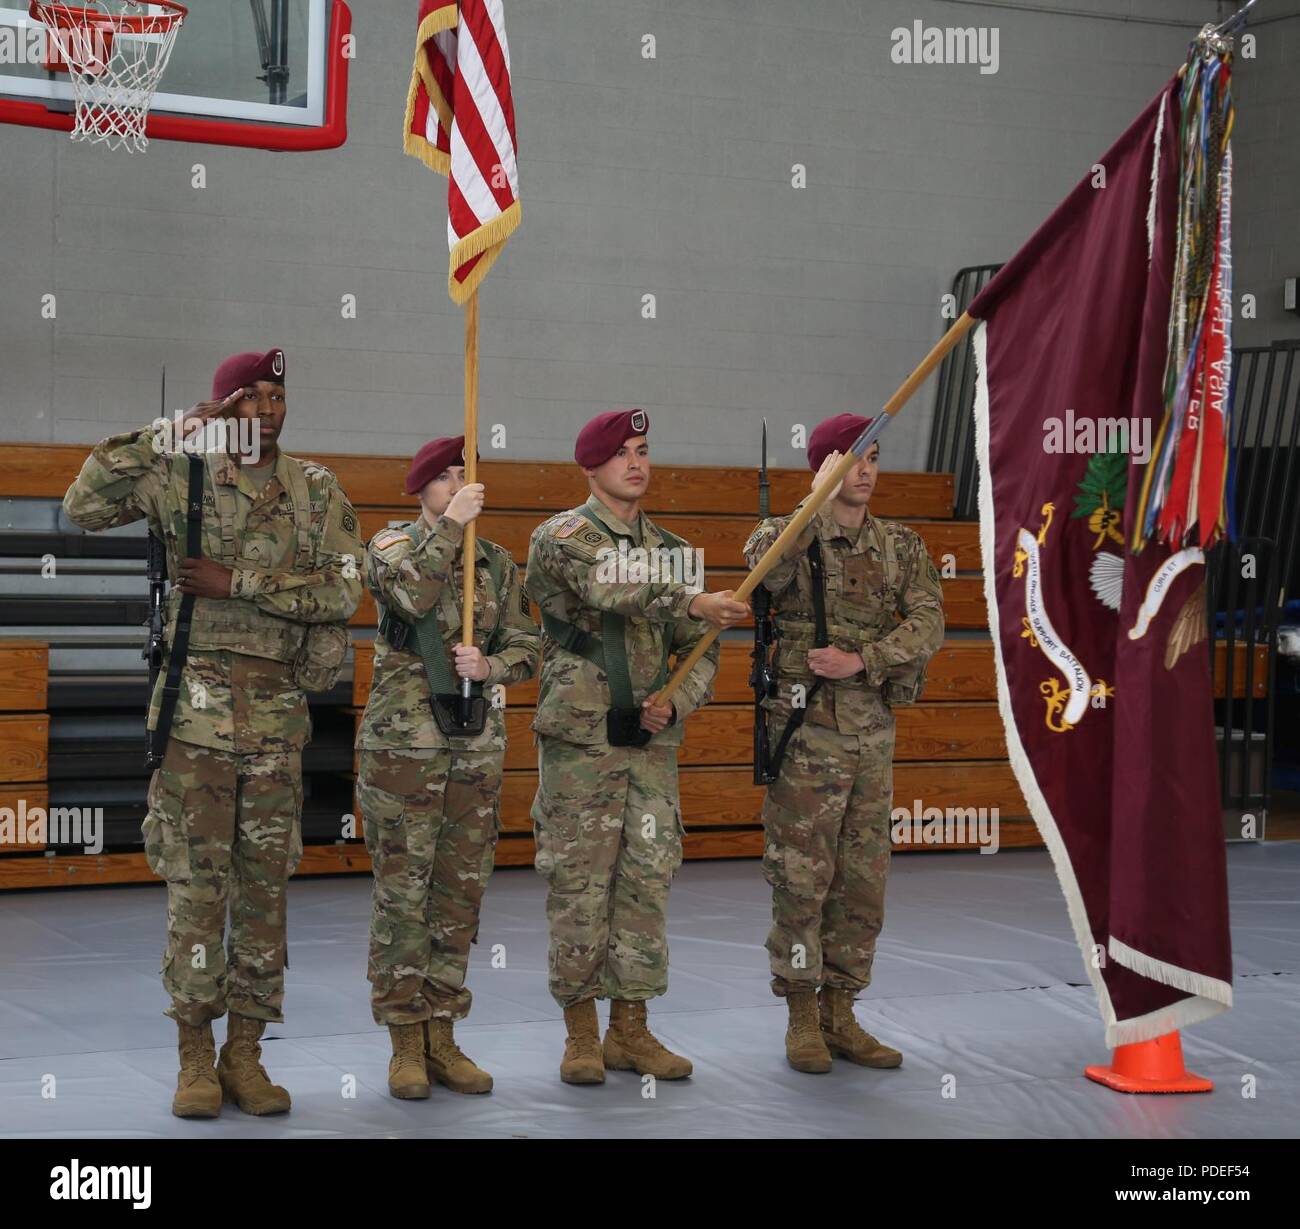 U.S. Paratroopers of the 307th Brigade Support Battalion, 82nd Airborne Division, present arms during the Color Guard Competition on Fort Bragg, N.C., May 18, 2018. The competiton is held to see who will earn the chance to perform as color guard during the events of the All american Week celebration. Stock Photo